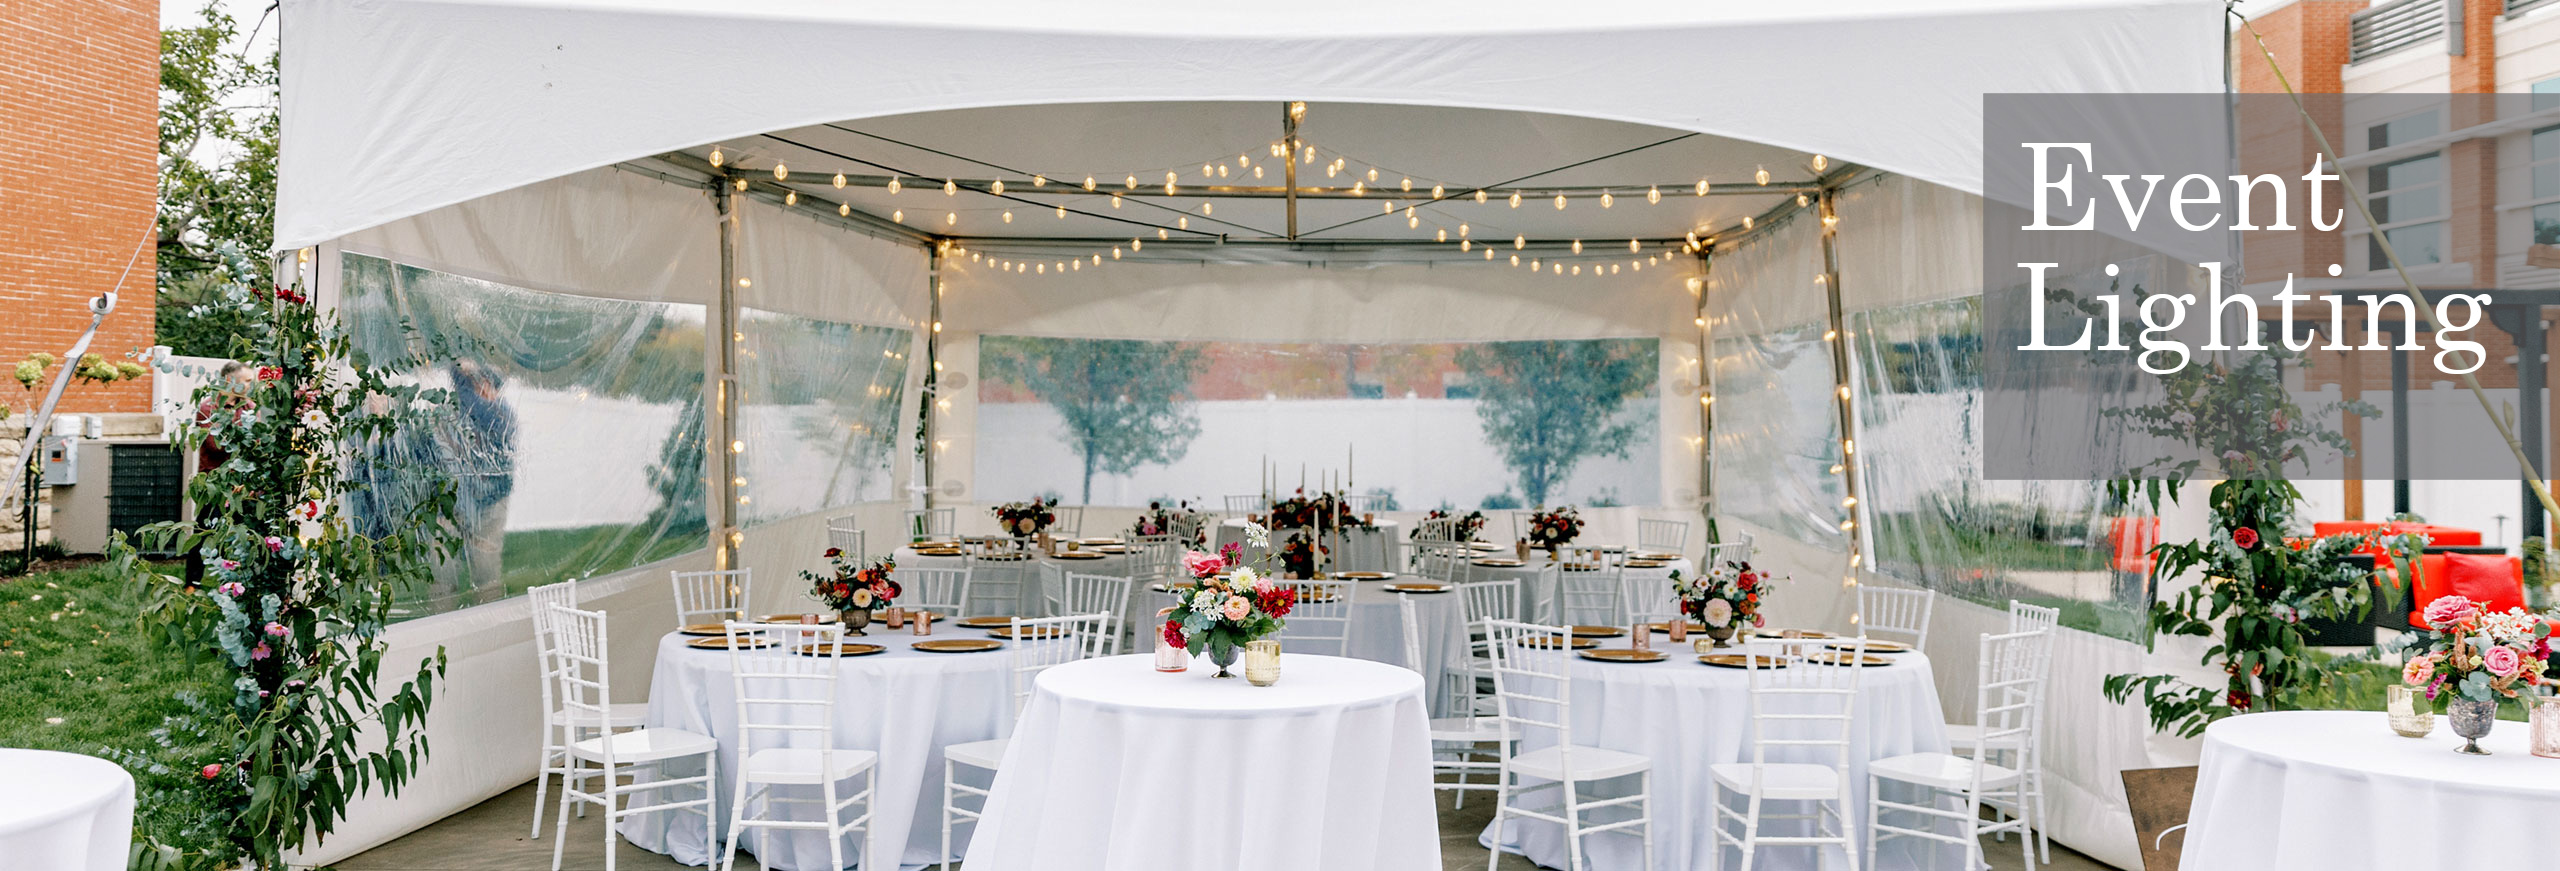 wedding tents, tables and chairs